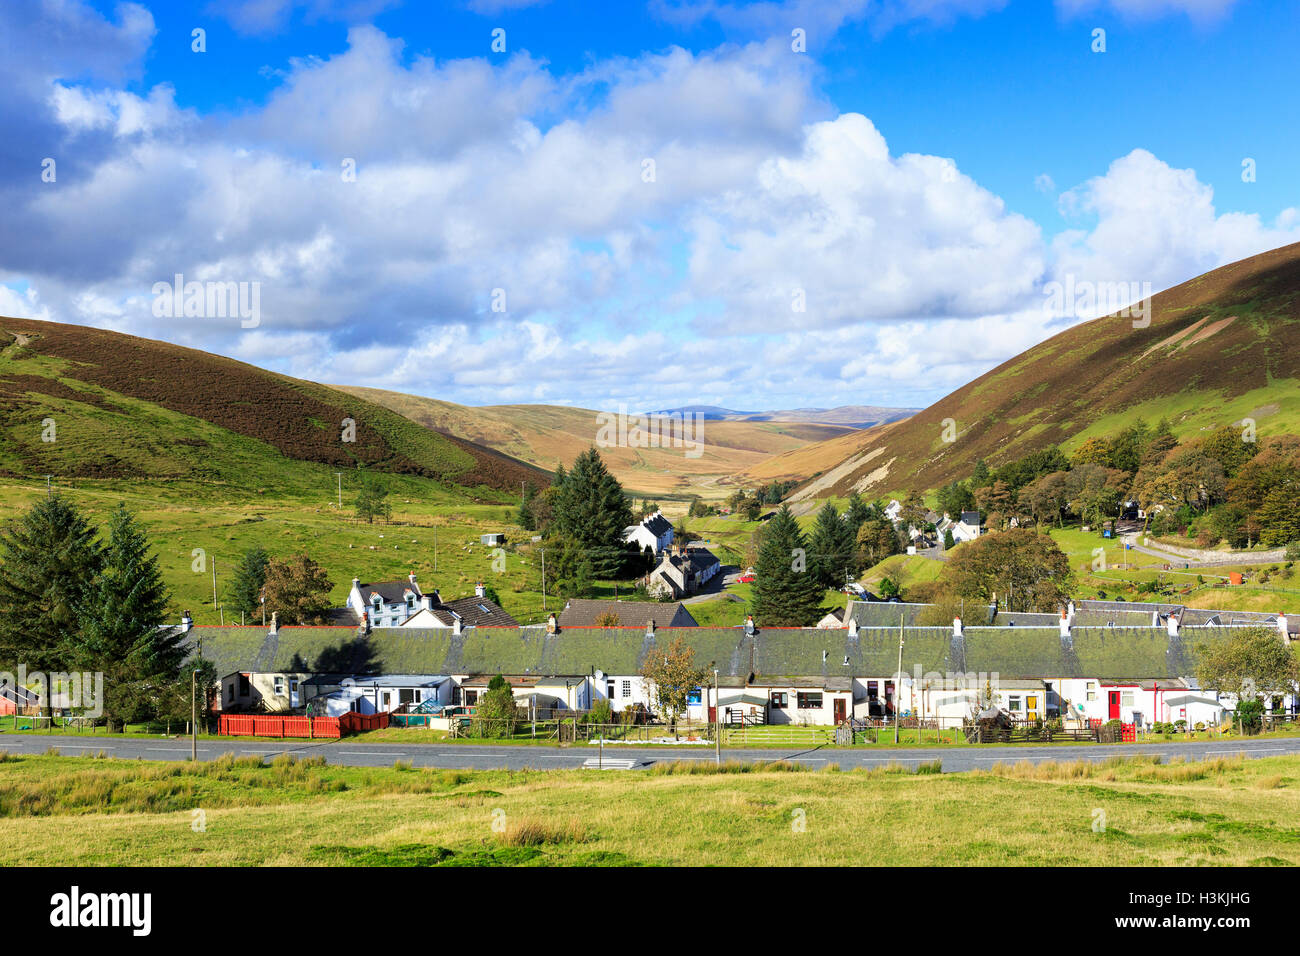 Village of Wanlockhead, Dumfrieshire, the highest village in Scotland, 1531 feet above sealevel, and famous for leadmining Stock Photo